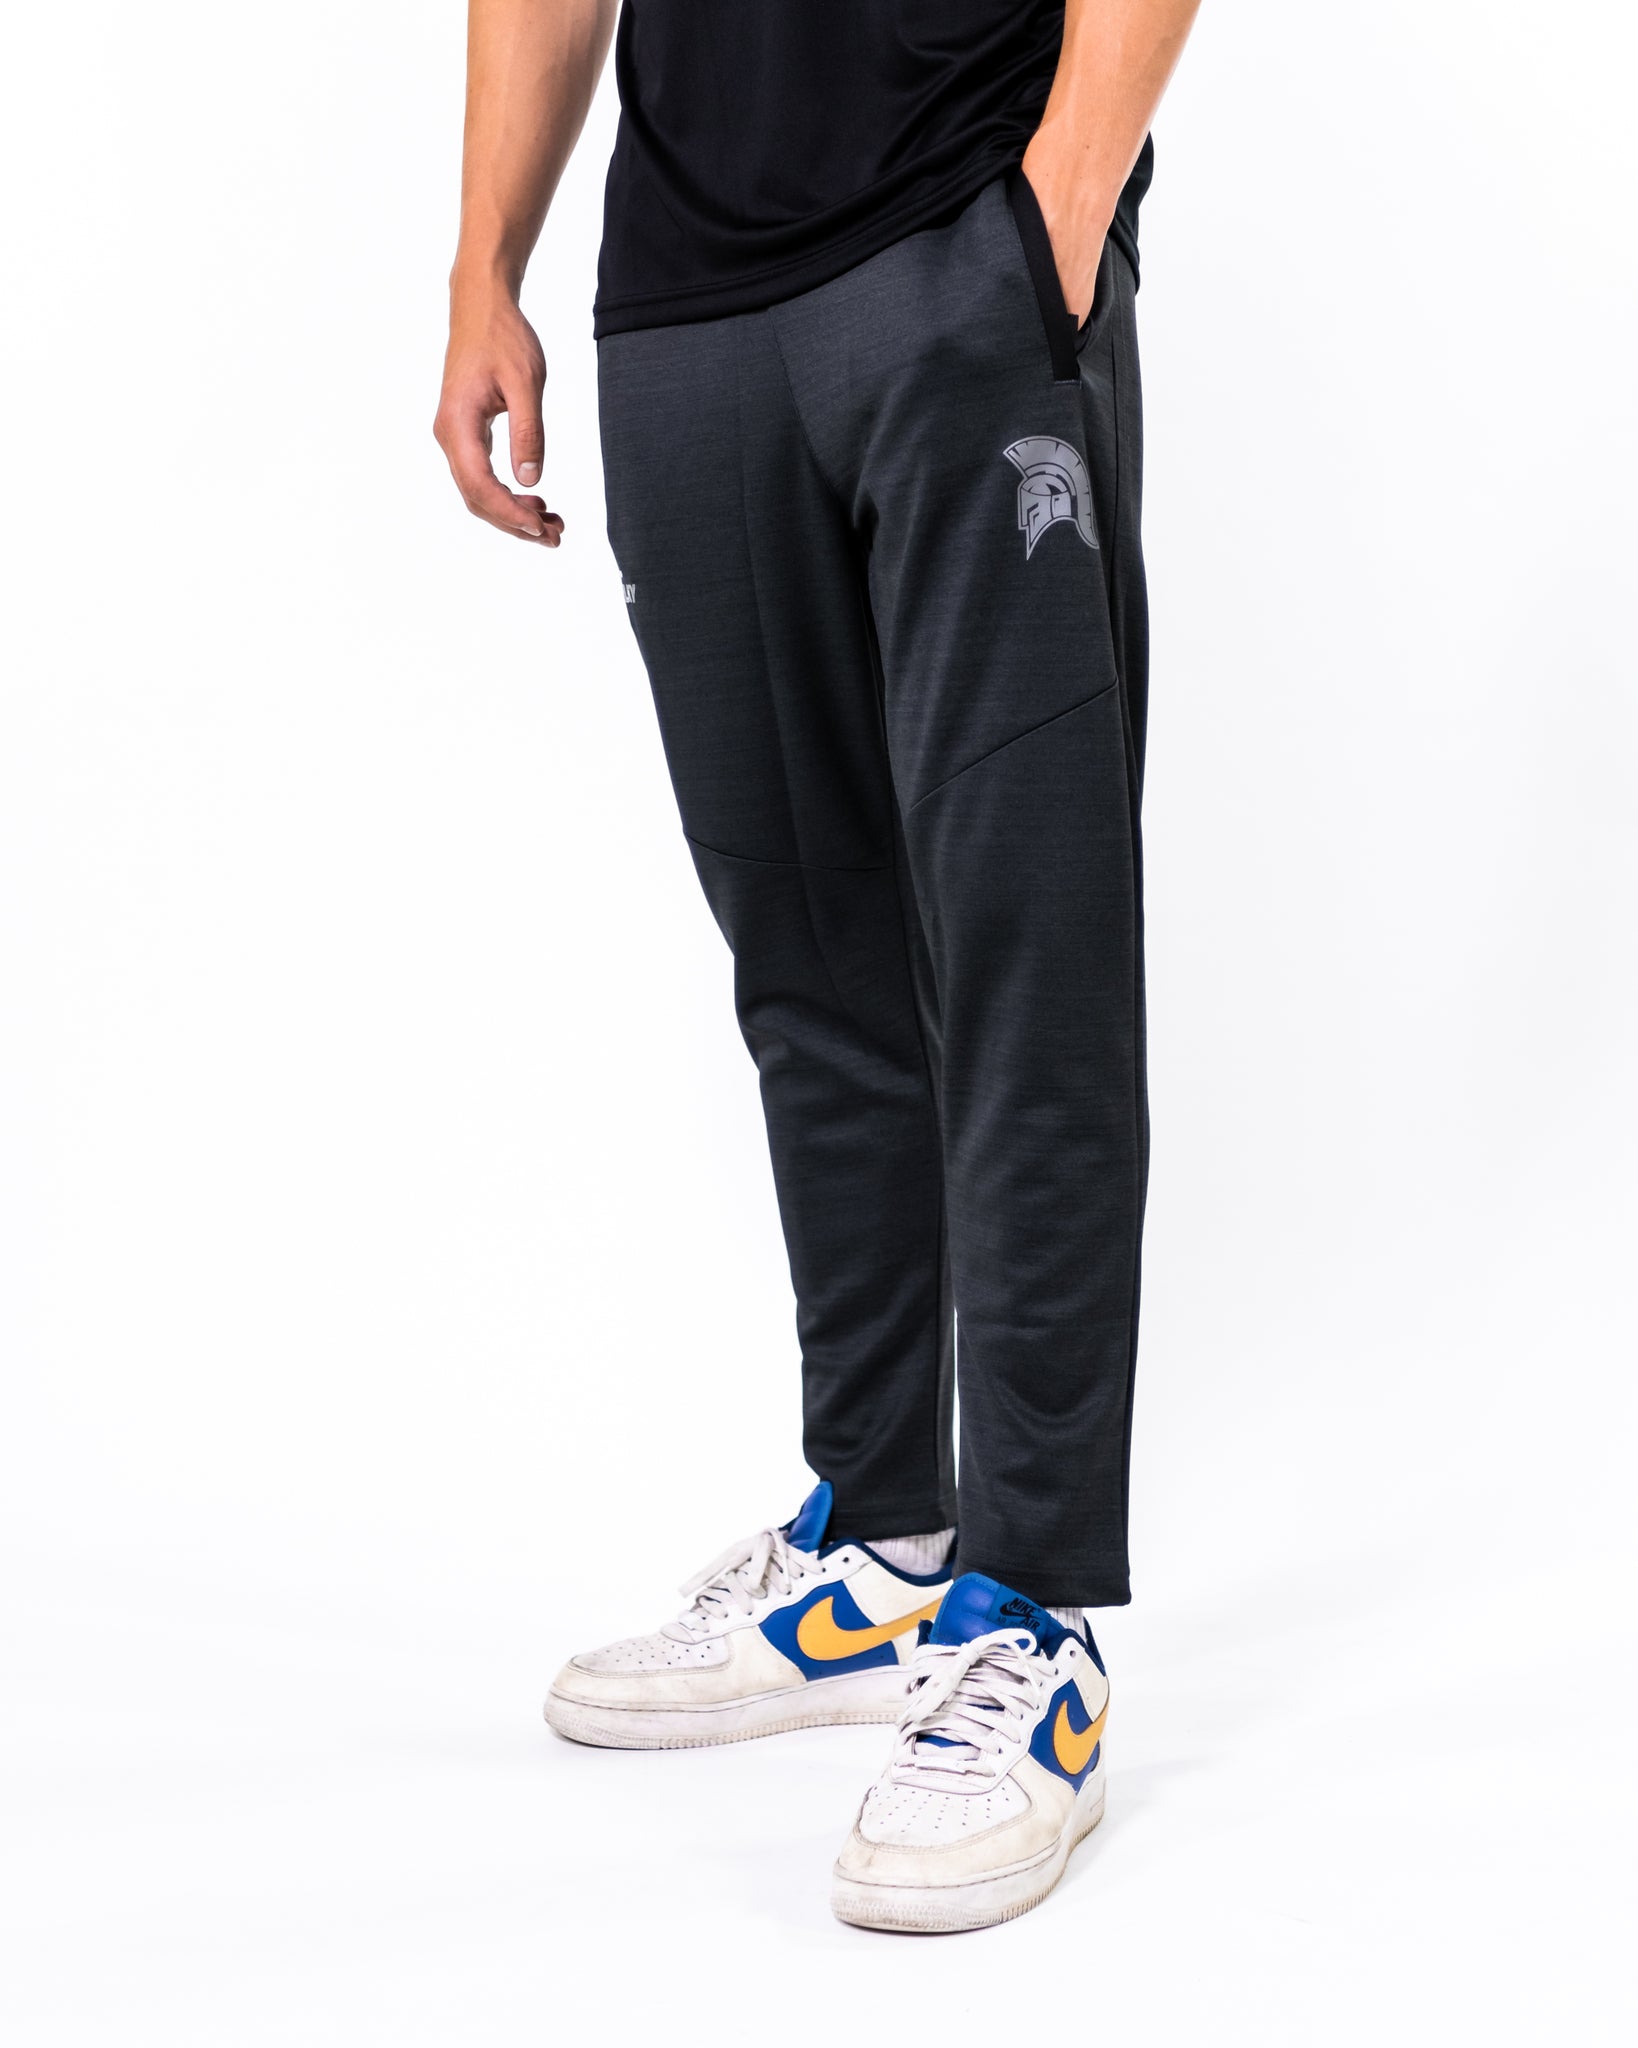 Cologne Centurions On-Field Performance Trainer Pants